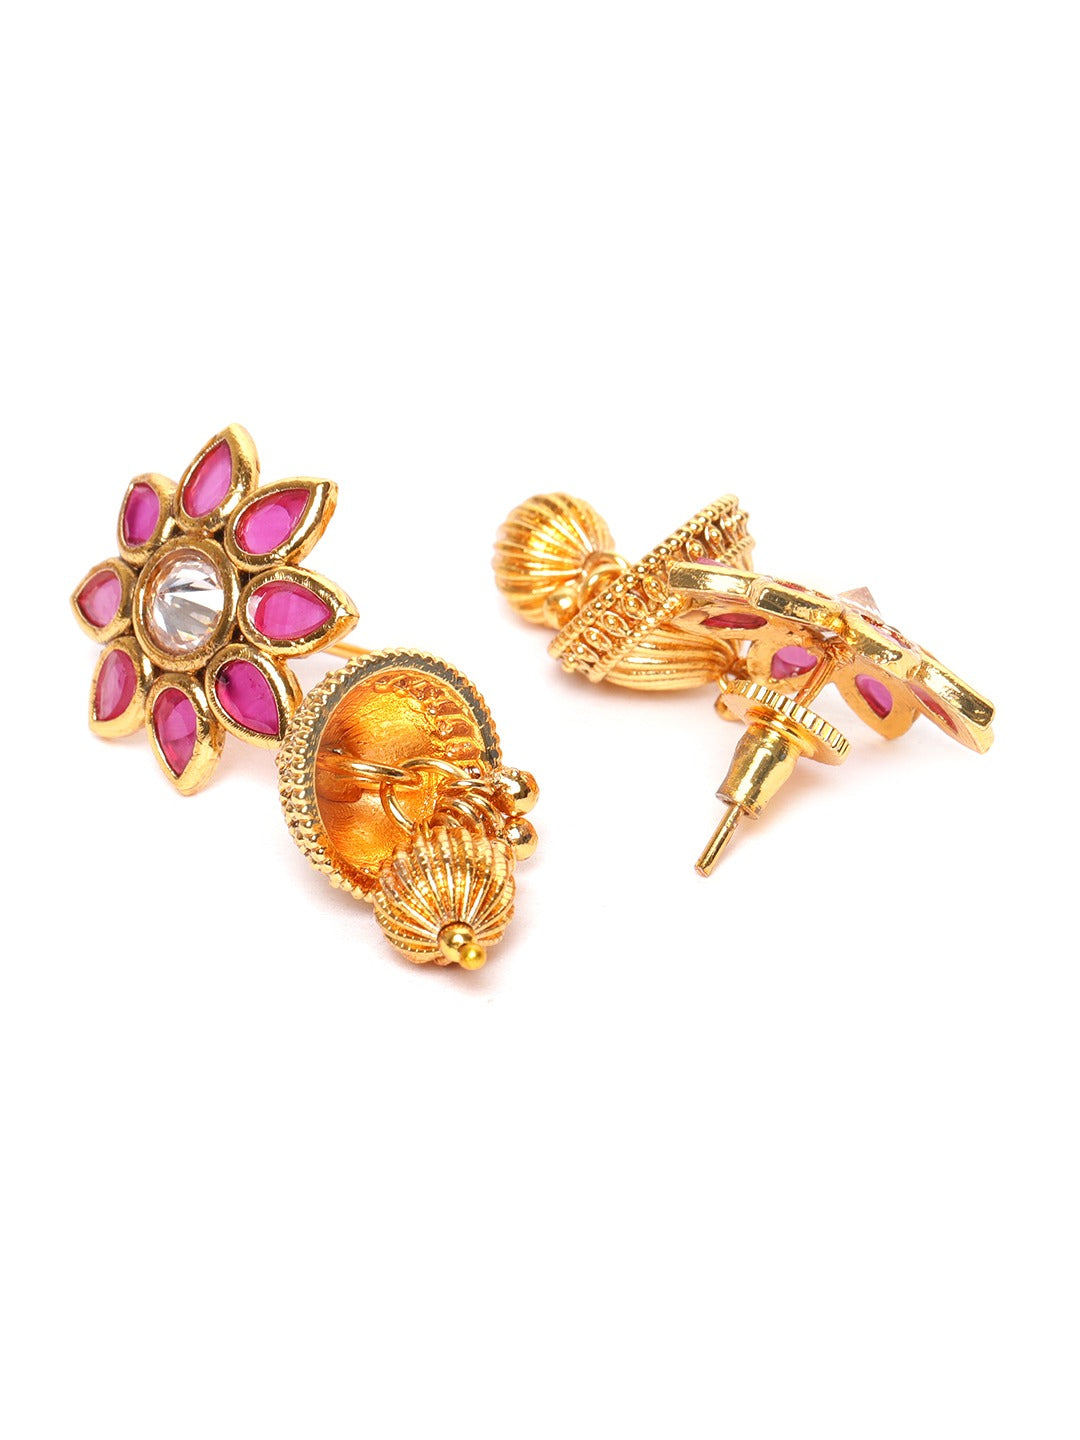 Jewels Gehna Pink Gold-Plated Stone Studded Handcrafted Jewellery Set